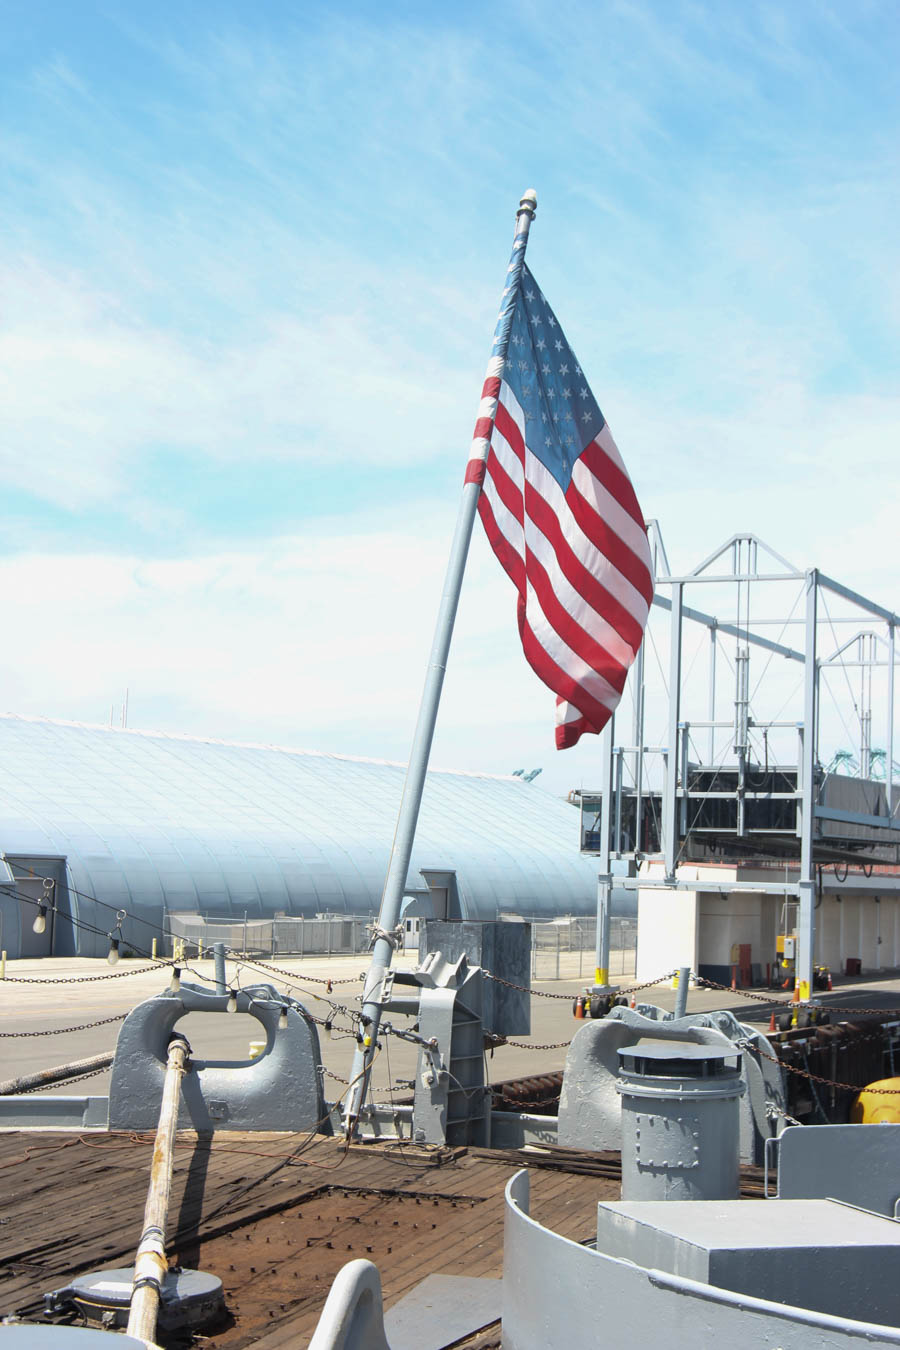 Visiting the USS Iowa on June 1st 2015